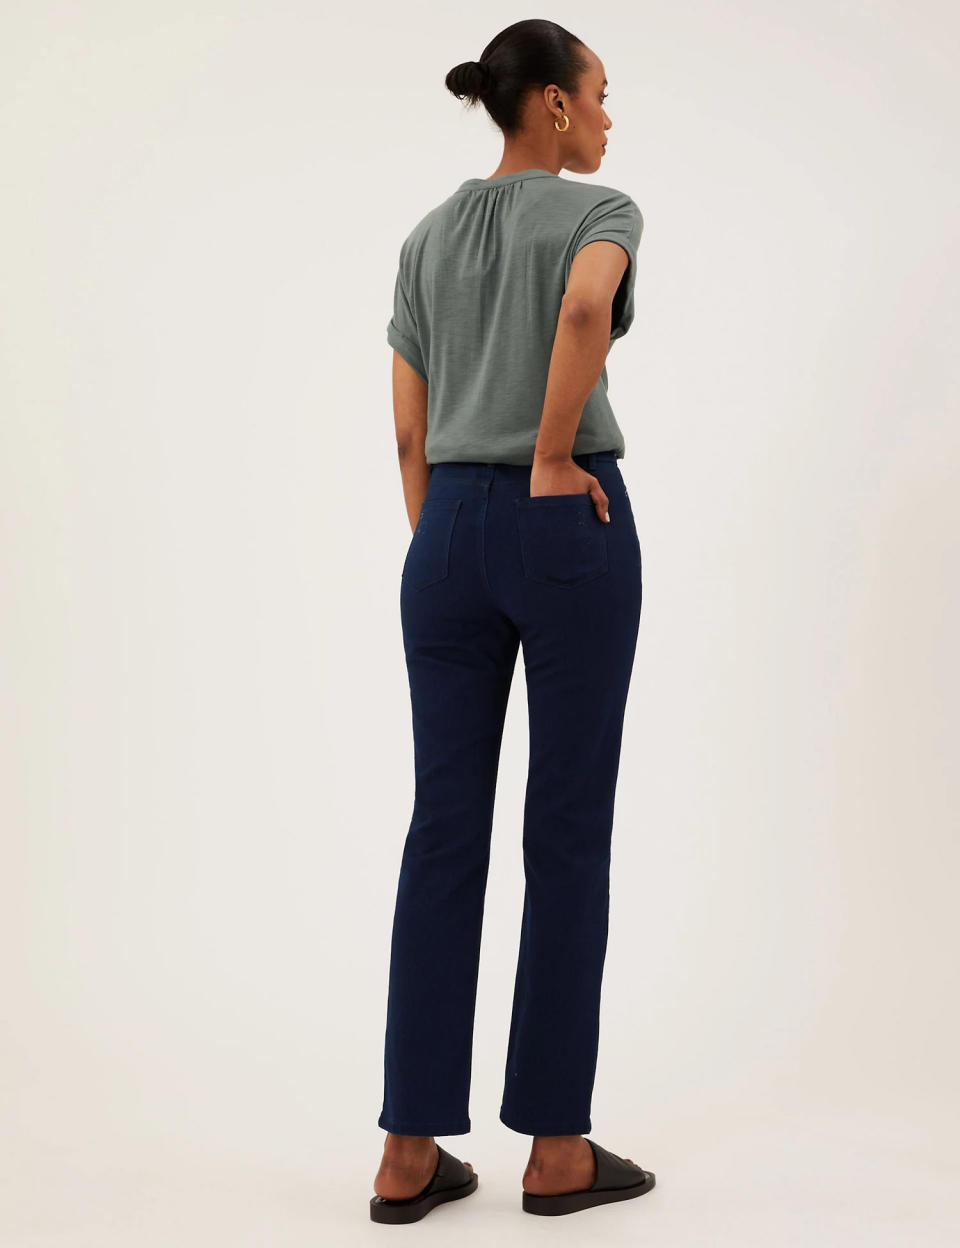 The jeans flatter every shape without being tight and uncomfortable. (M&S)